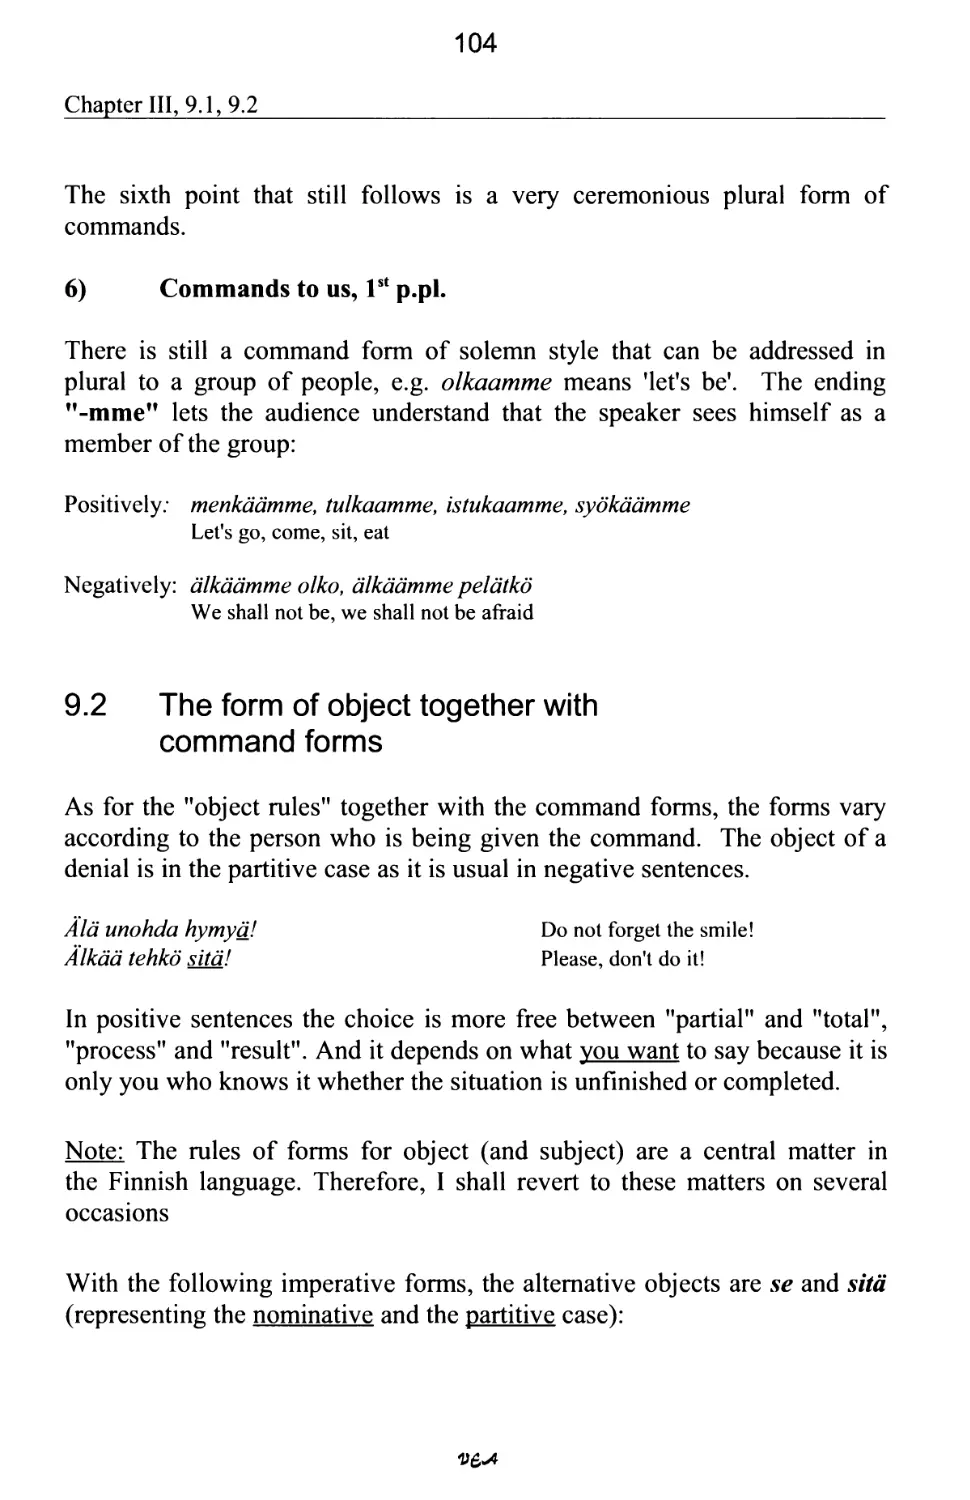 9.2 The form of object together with command forms